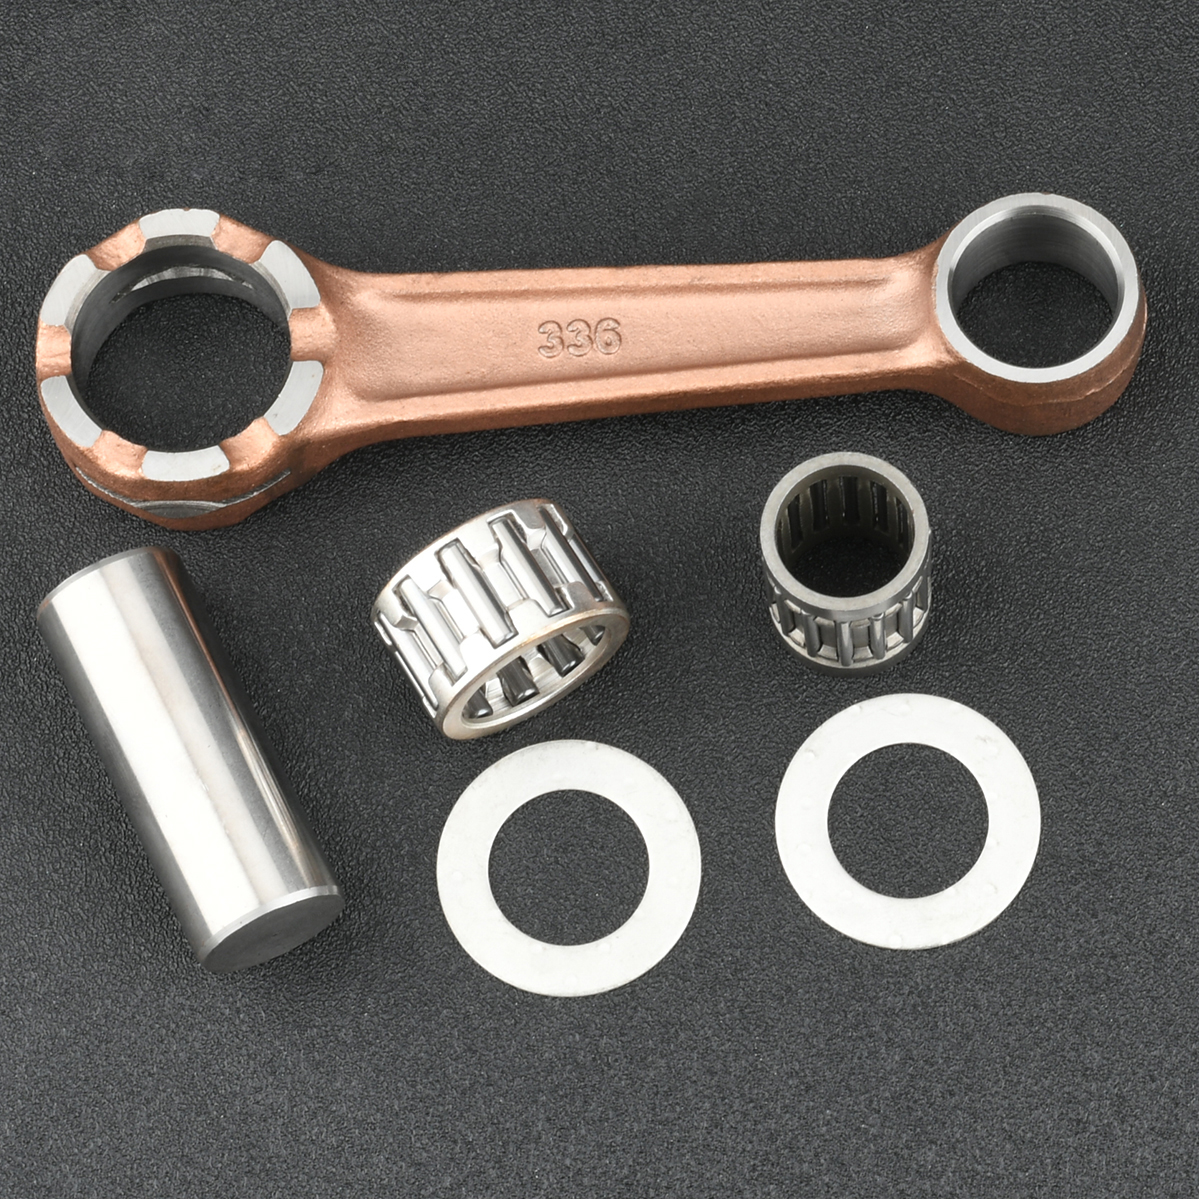 CONNECTING ROD KIT ASSY 336-00040-0 1 M forTohatsu Nissan Outboard 25HP 30HP 2T